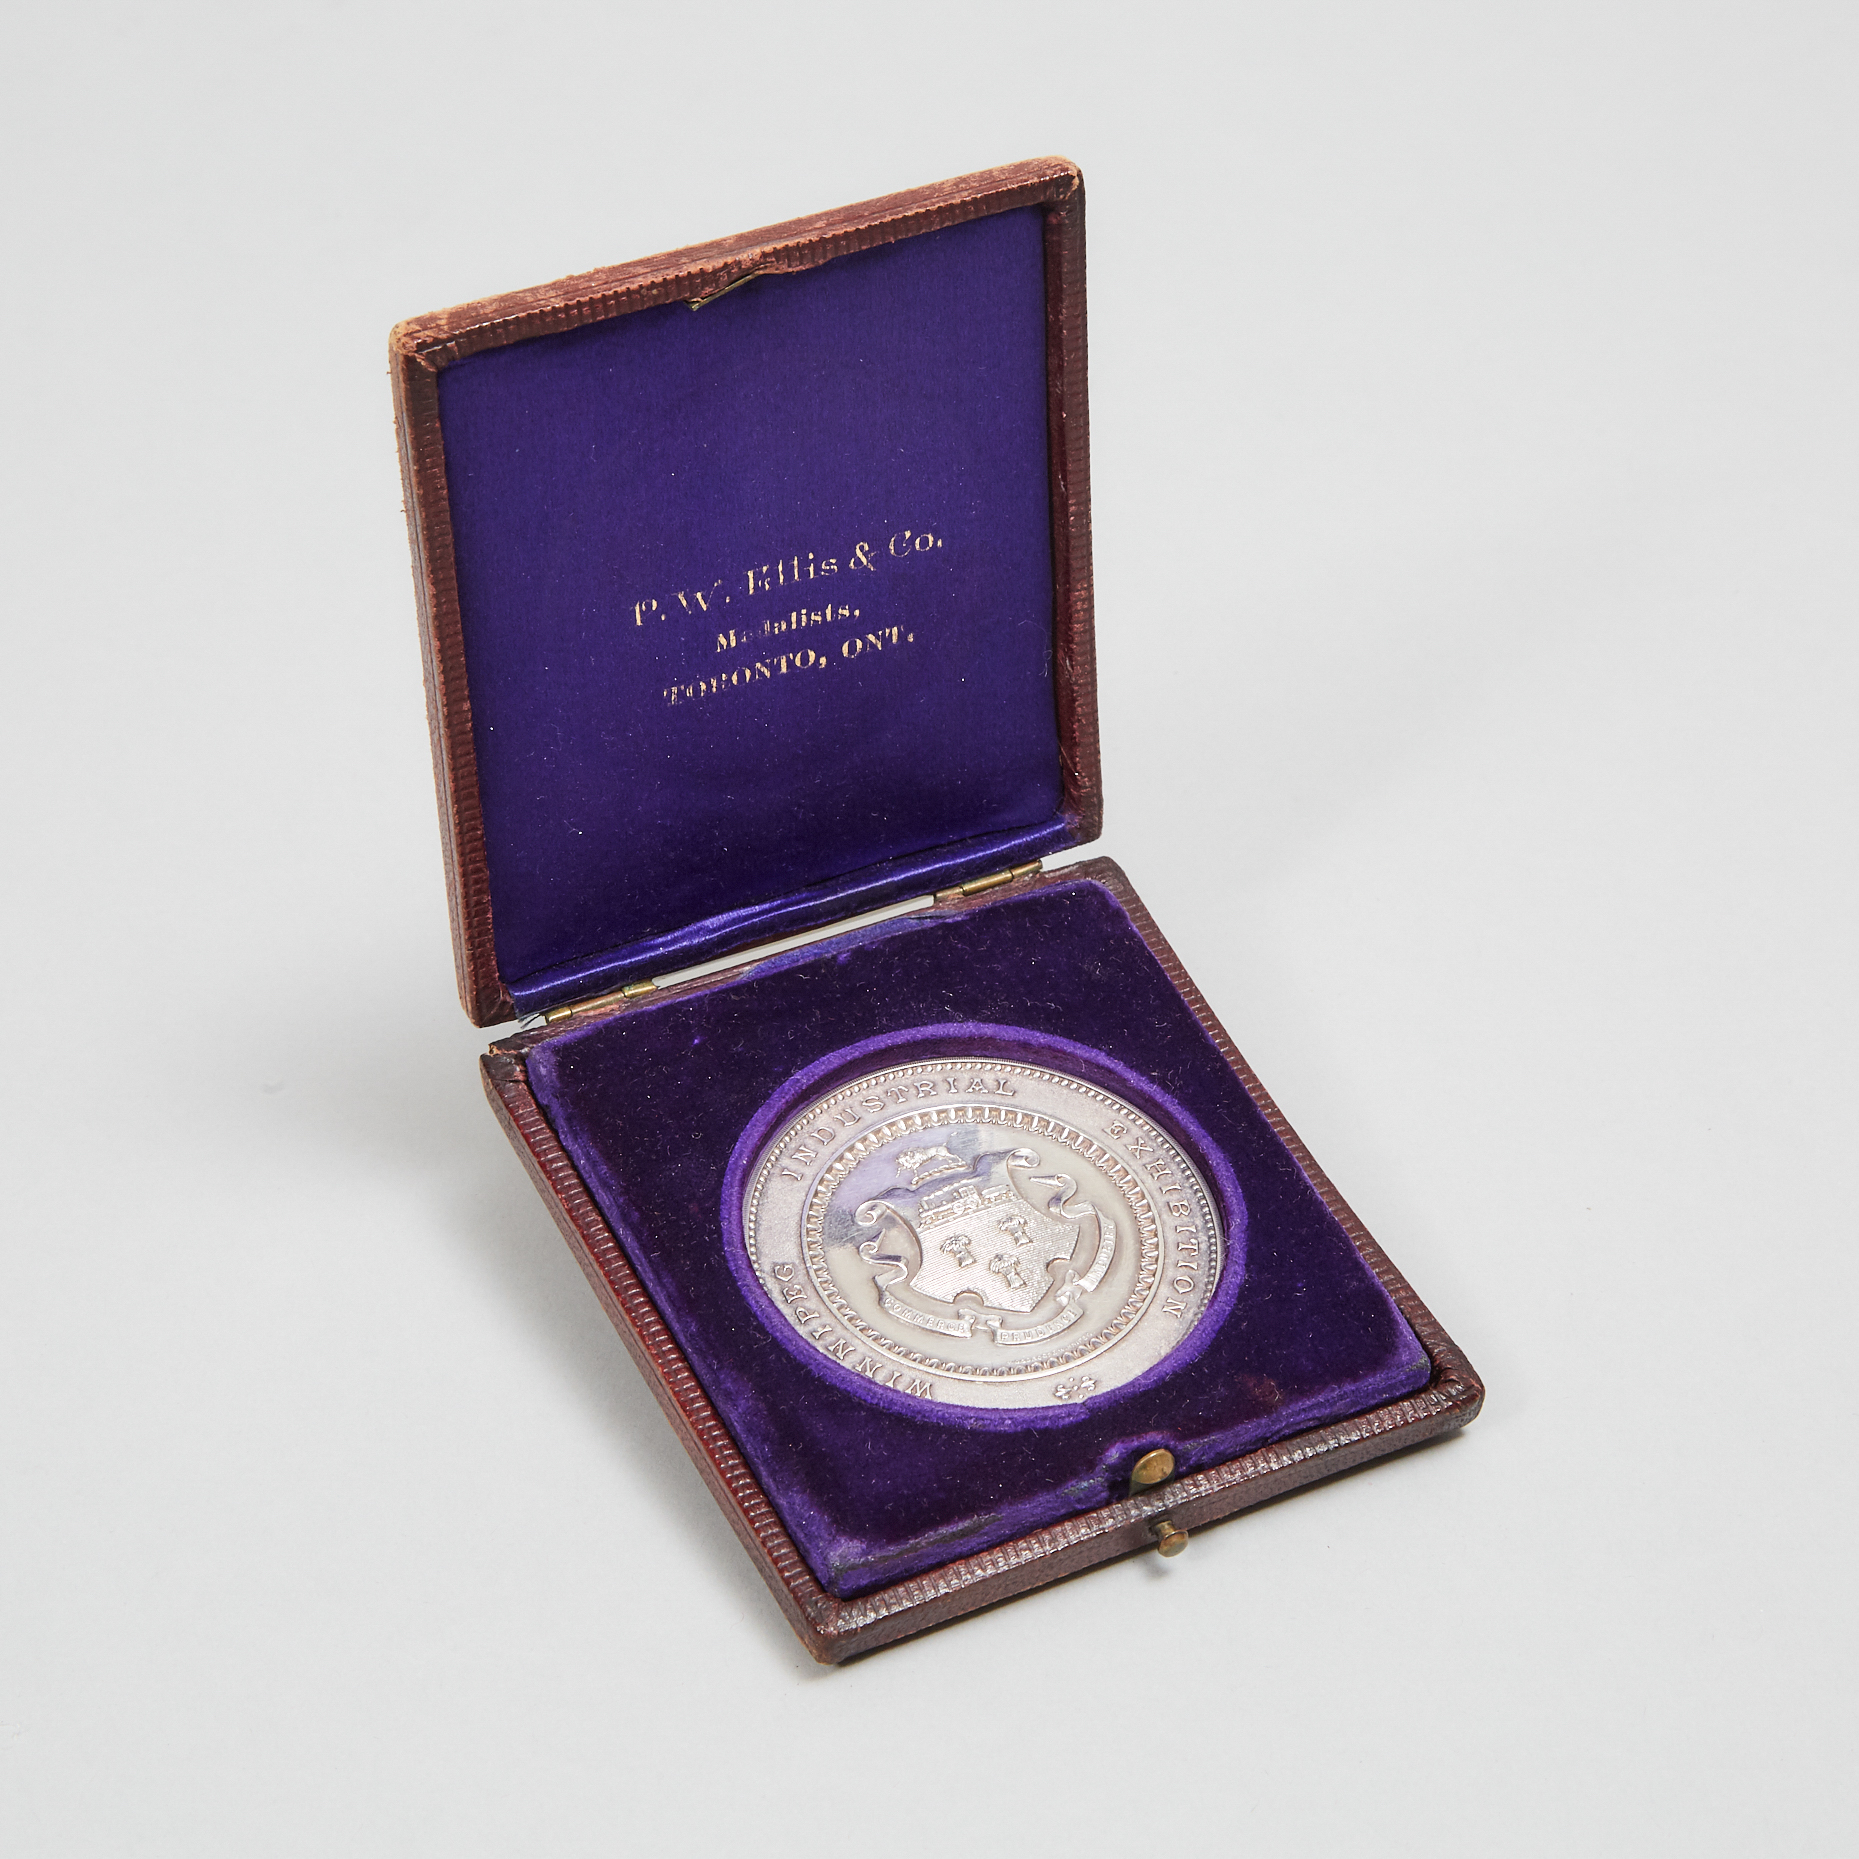 Winnipeg Industrial Exhibition Silver 1st Prize Agricultural Medal, P.W. Ellis & Co., Toronto, 1892